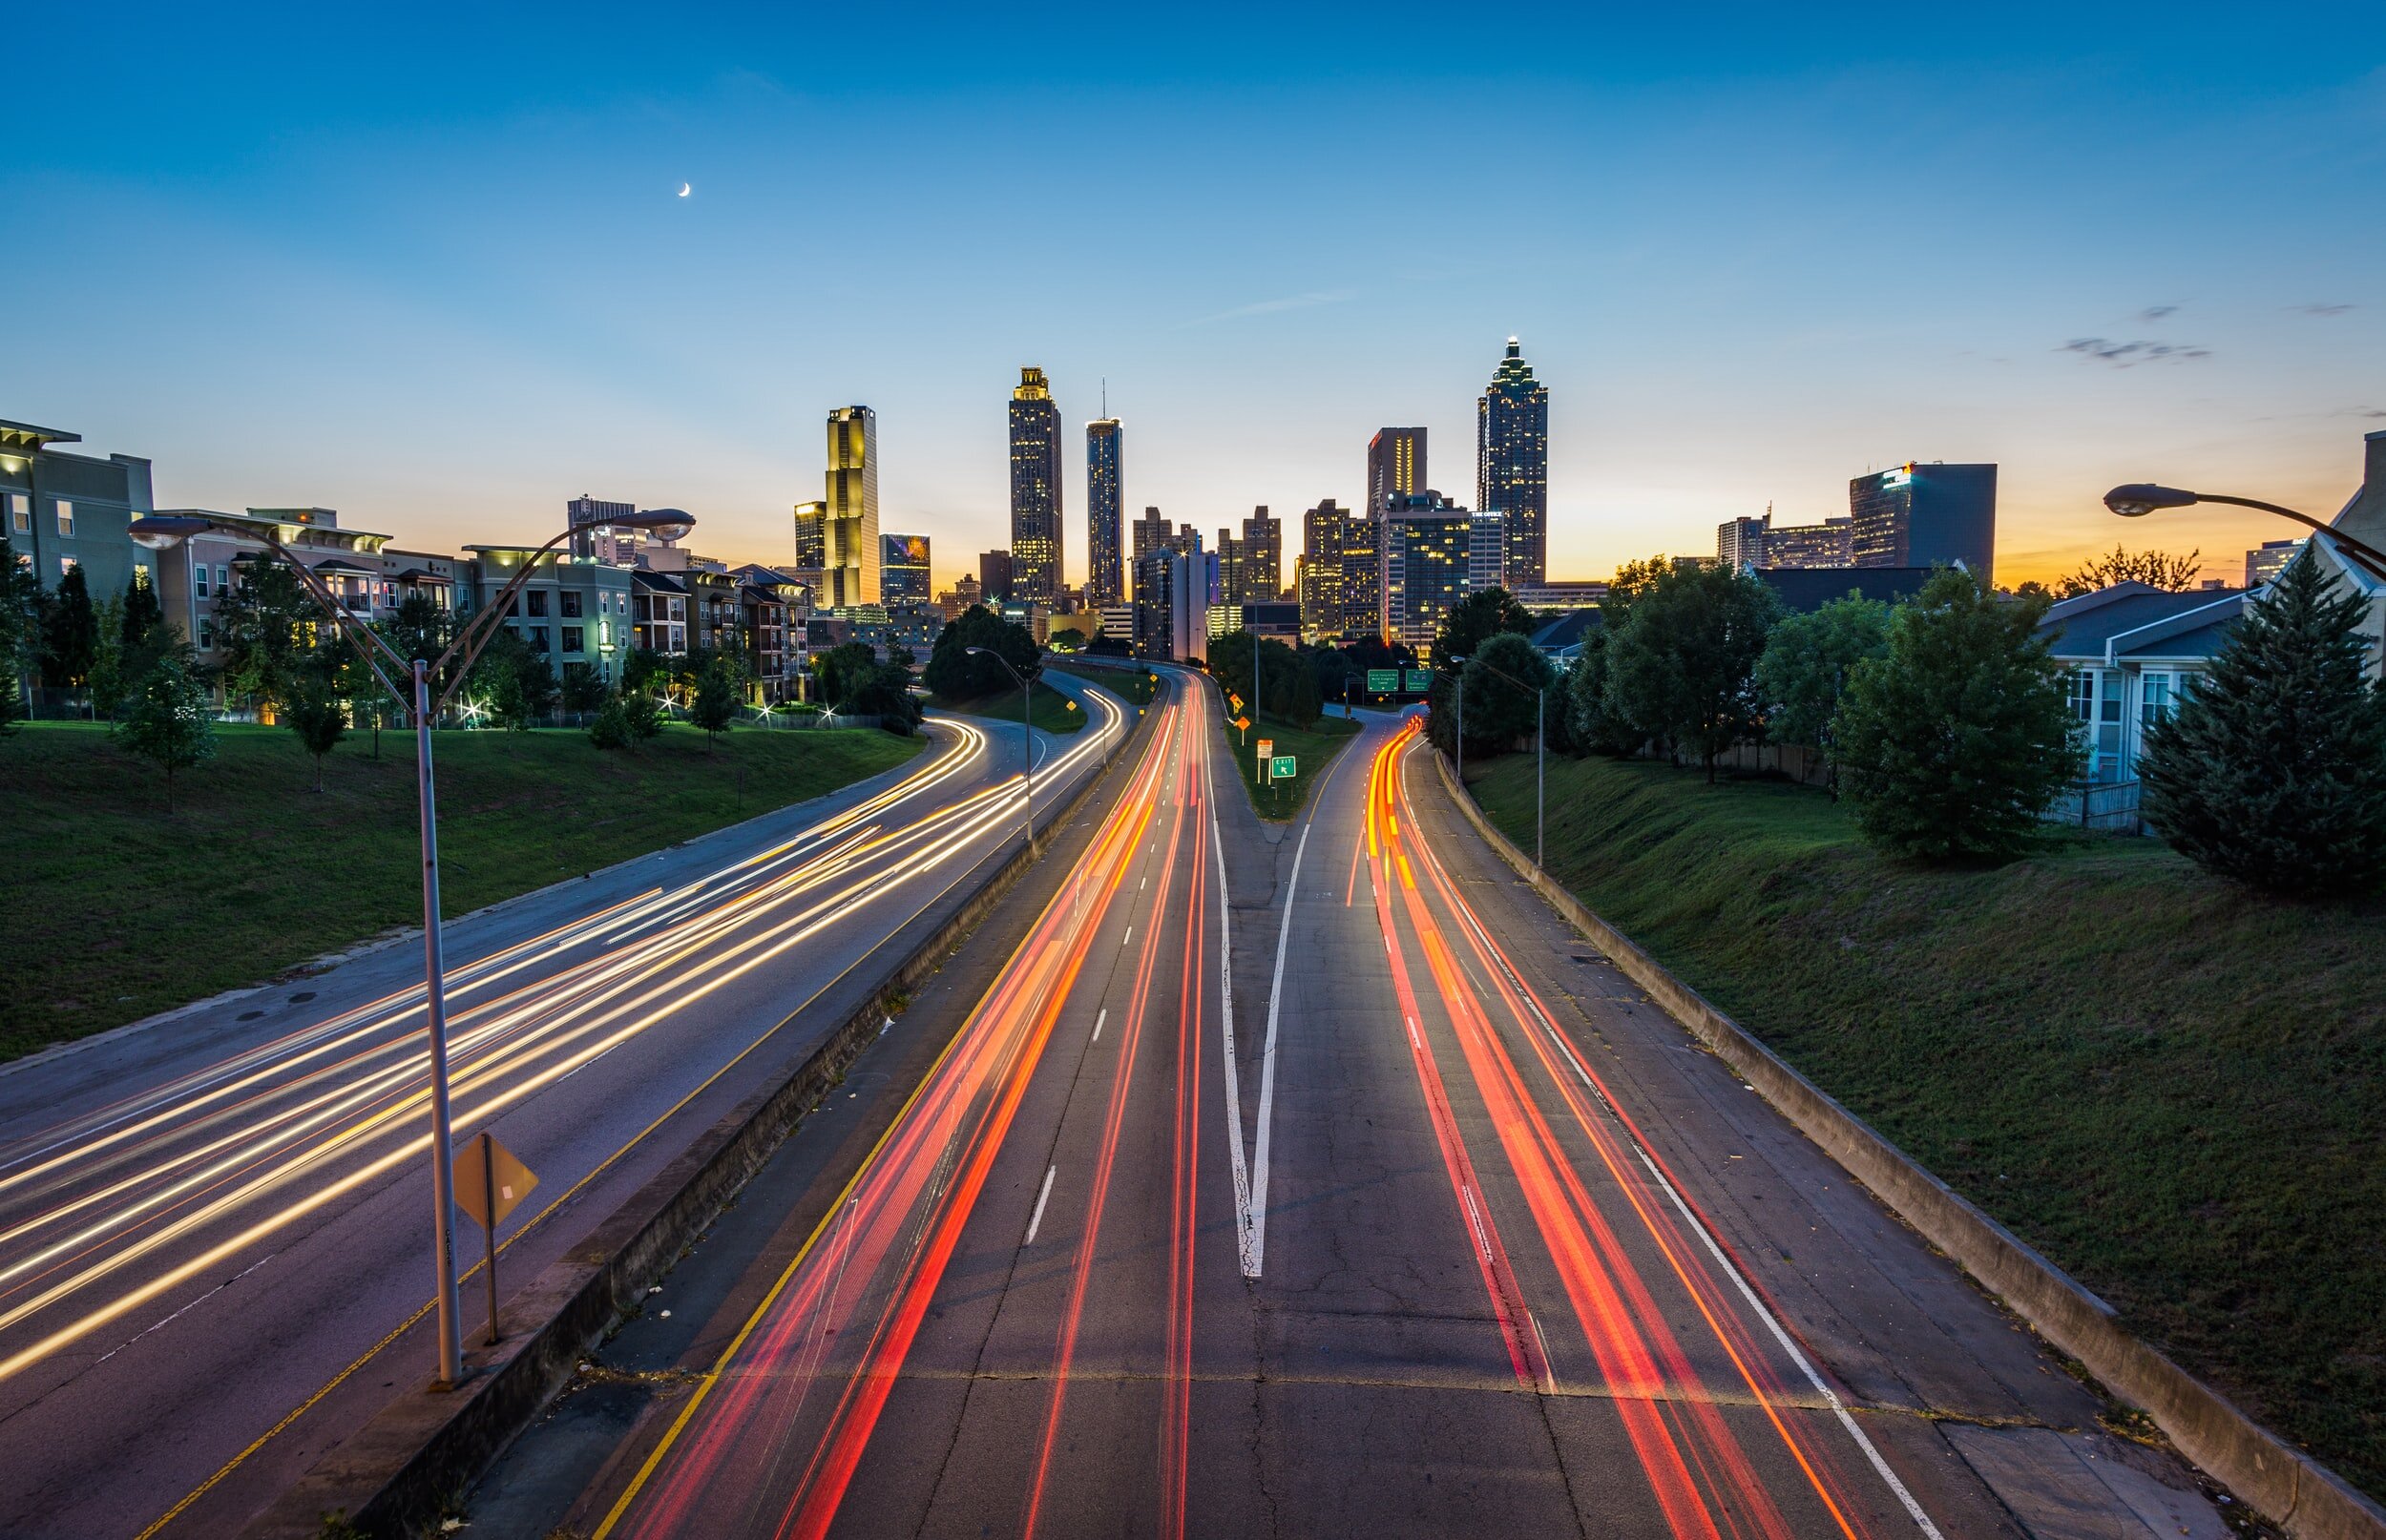 Energy is at the core of economic activity in Atlanta. - In 2017, the City of Atlanta enacted the Clean Energy Resolution, a pledge to transition to 100 percent clean energy. The Resolution prioritizes energy efficiency, renewable energy, and eliminating reliance on burning fossil fuels to meet Atlanta’s energy needs.In March 2019, the City of Atlanta adopted “Clean Energy Atlanta” the result of a year-long stakeholder development process, in which thousands of community members weighed in to distill our primary values for a clean energy transition for all Atlantans.